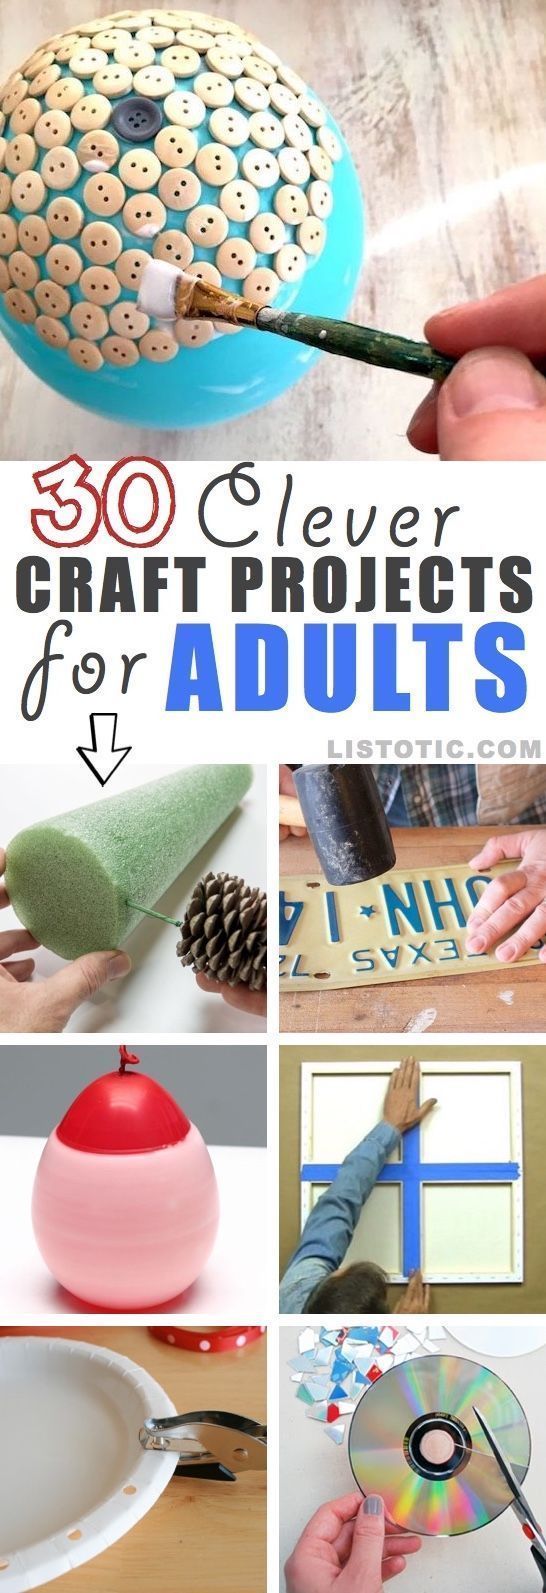 Easy DIY Craft Ideas That Will Spark Your Creativity for Adults - Easy DIY Craft Ideas That Will Spark Your Creativity for Adults -   18 diy Easy recycle ideas